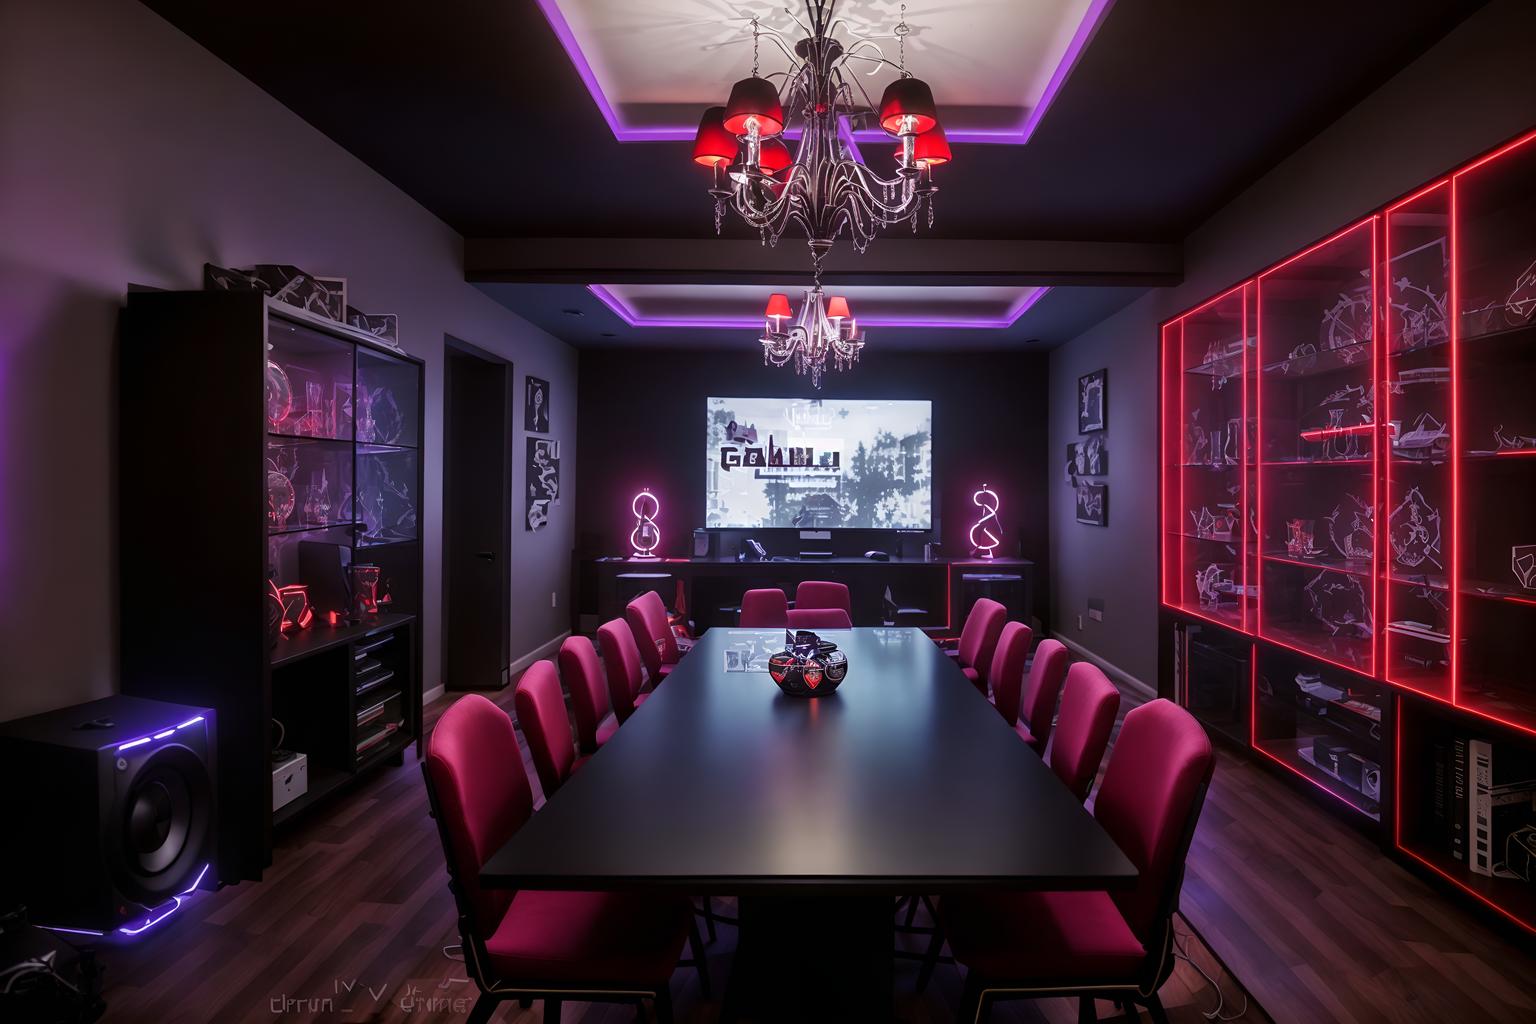 gaming room-style (dining room interior) with table cloth and vase and plates, cutlery and glasses on dining table and bookshelves and light or chandelier and dining table and plant and dining table chairs. . with purple and red lights and speakers and gaming chair and multiple displays and dark walls and at night and computer desk with computer displays and keyboard and purple, red and blue fade light. . cinematic photo, highly detailed, cinematic lighting, ultra-detailed, ultrarealistic, photorealism, 8k. gaming room interior design style. masterpiece, cinematic light, ultrarealistic+, photorealistic+, 8k, raw photo, realistic, sharp focus on eyes, (symmetrical eyes), (intact eyes), hyperrealistic, highest quality, best quality, , highly detailed, masterpiece, best quality, extremely detailed 8k wallpaper, masterpiece, best quality, ultra-detailed, best shadow, detailed background, detailed face, detailed eyes, high contrast, best illumination, detailed face, dulux, caustic, dynamic angle, detailed glow. dramatic lighting. highly detailed, insanely detailed hair, symmetrical, intricate details, professionally retouched, 8k high definition. strong bokeh. award winning photo.